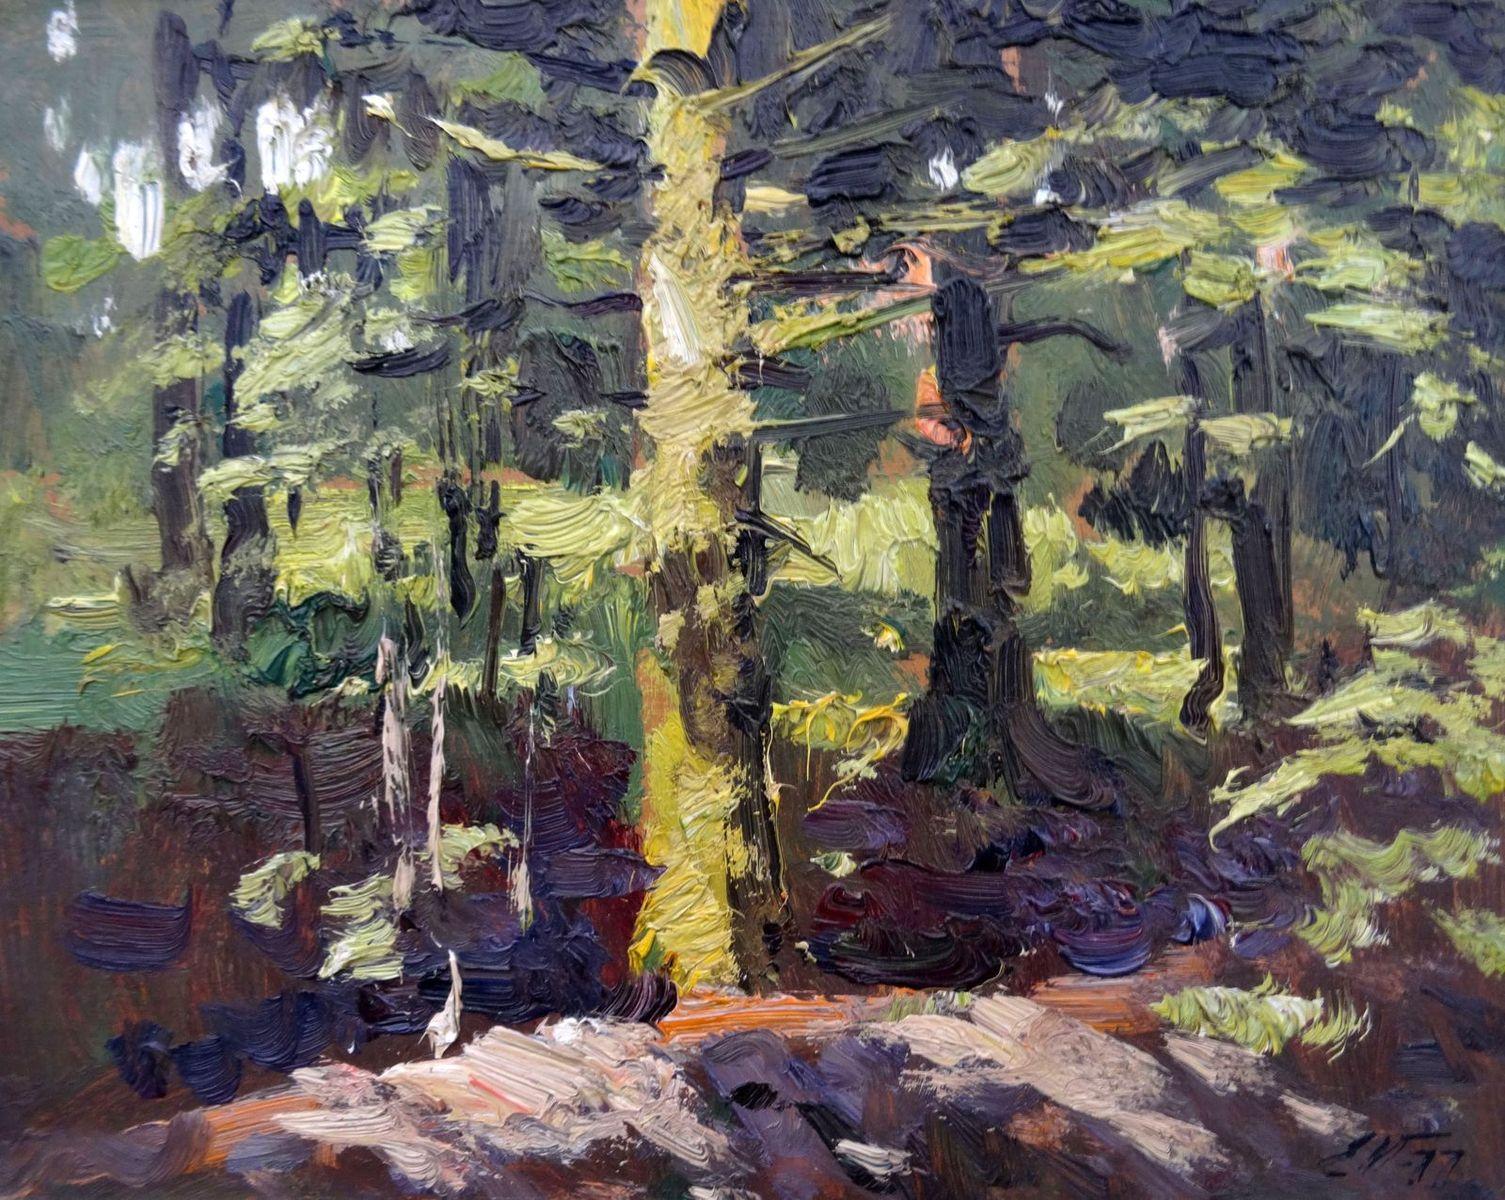 Sunny day in the forest. 1977, cardboard, oil, 21.5x26 cm